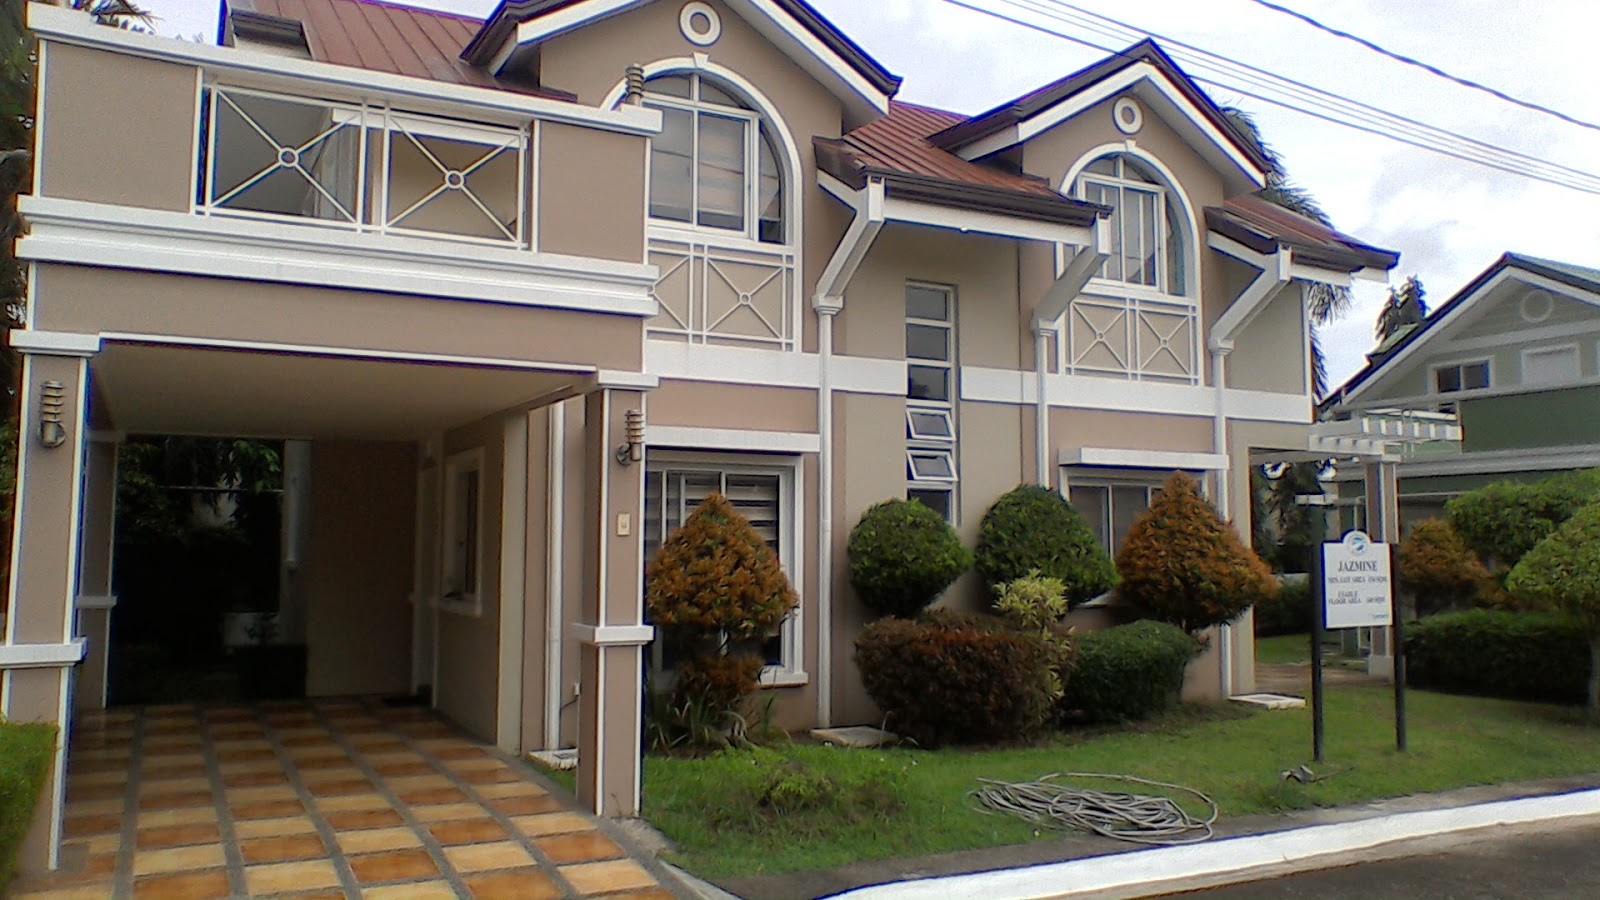 4 Bedrooms 3 Toilet & Bath house and lot in Governor's hills subdivision for sale